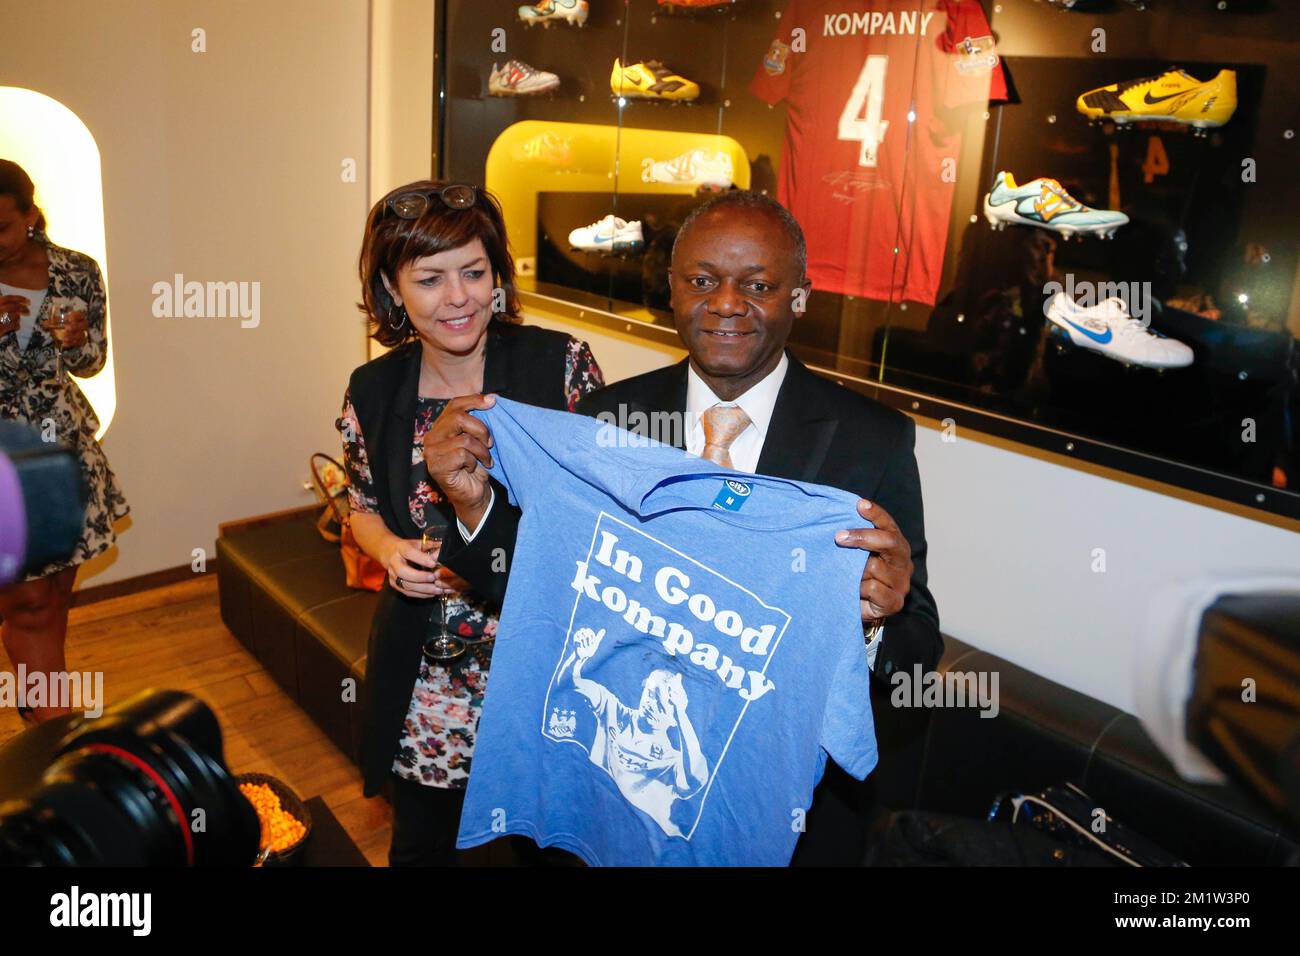 Minister Joelle Milquet and Pierre Kompany pictured during the opening of the 'Good Kompany' sports bar near Grand-Place - Grote Markt in Brussels city center, at the occasion of the opening of this new sports bar owned by international soccer player Vincent Kompany, Friday 18 April 2014.  Stock Photo